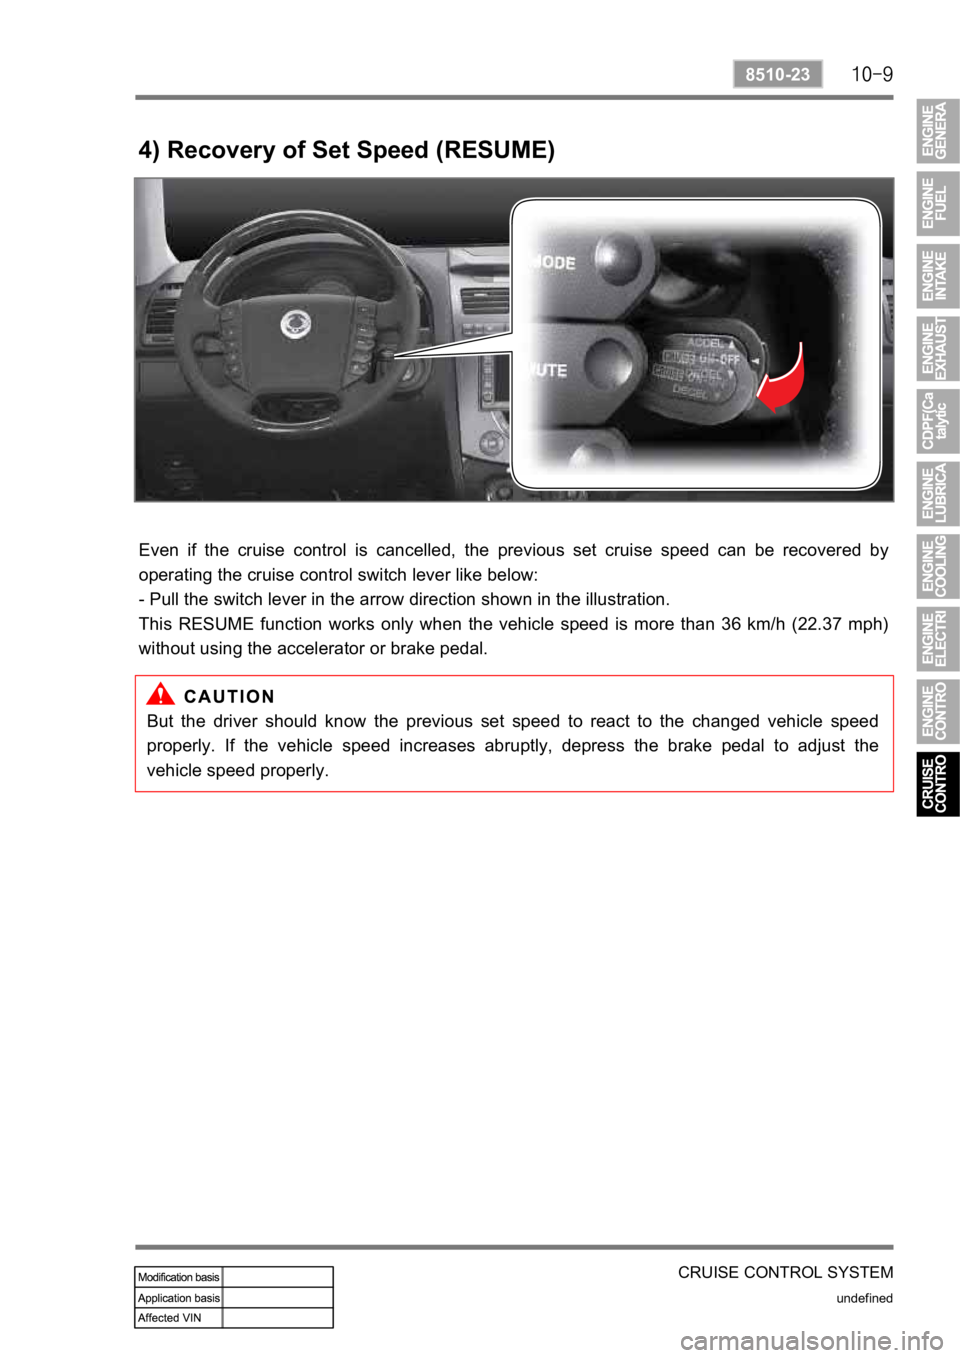 SSANGYONG REXTON 2008  Service Manual CRUISE CONTROL SYSTEM
undefined
8510-23
4) Recovery of Set Speed (RESUME)
Even  if  the  cruise  control  is  cancelled,  the  previous  set  cruise  speed  can  be  recovered  by
operating the cruise